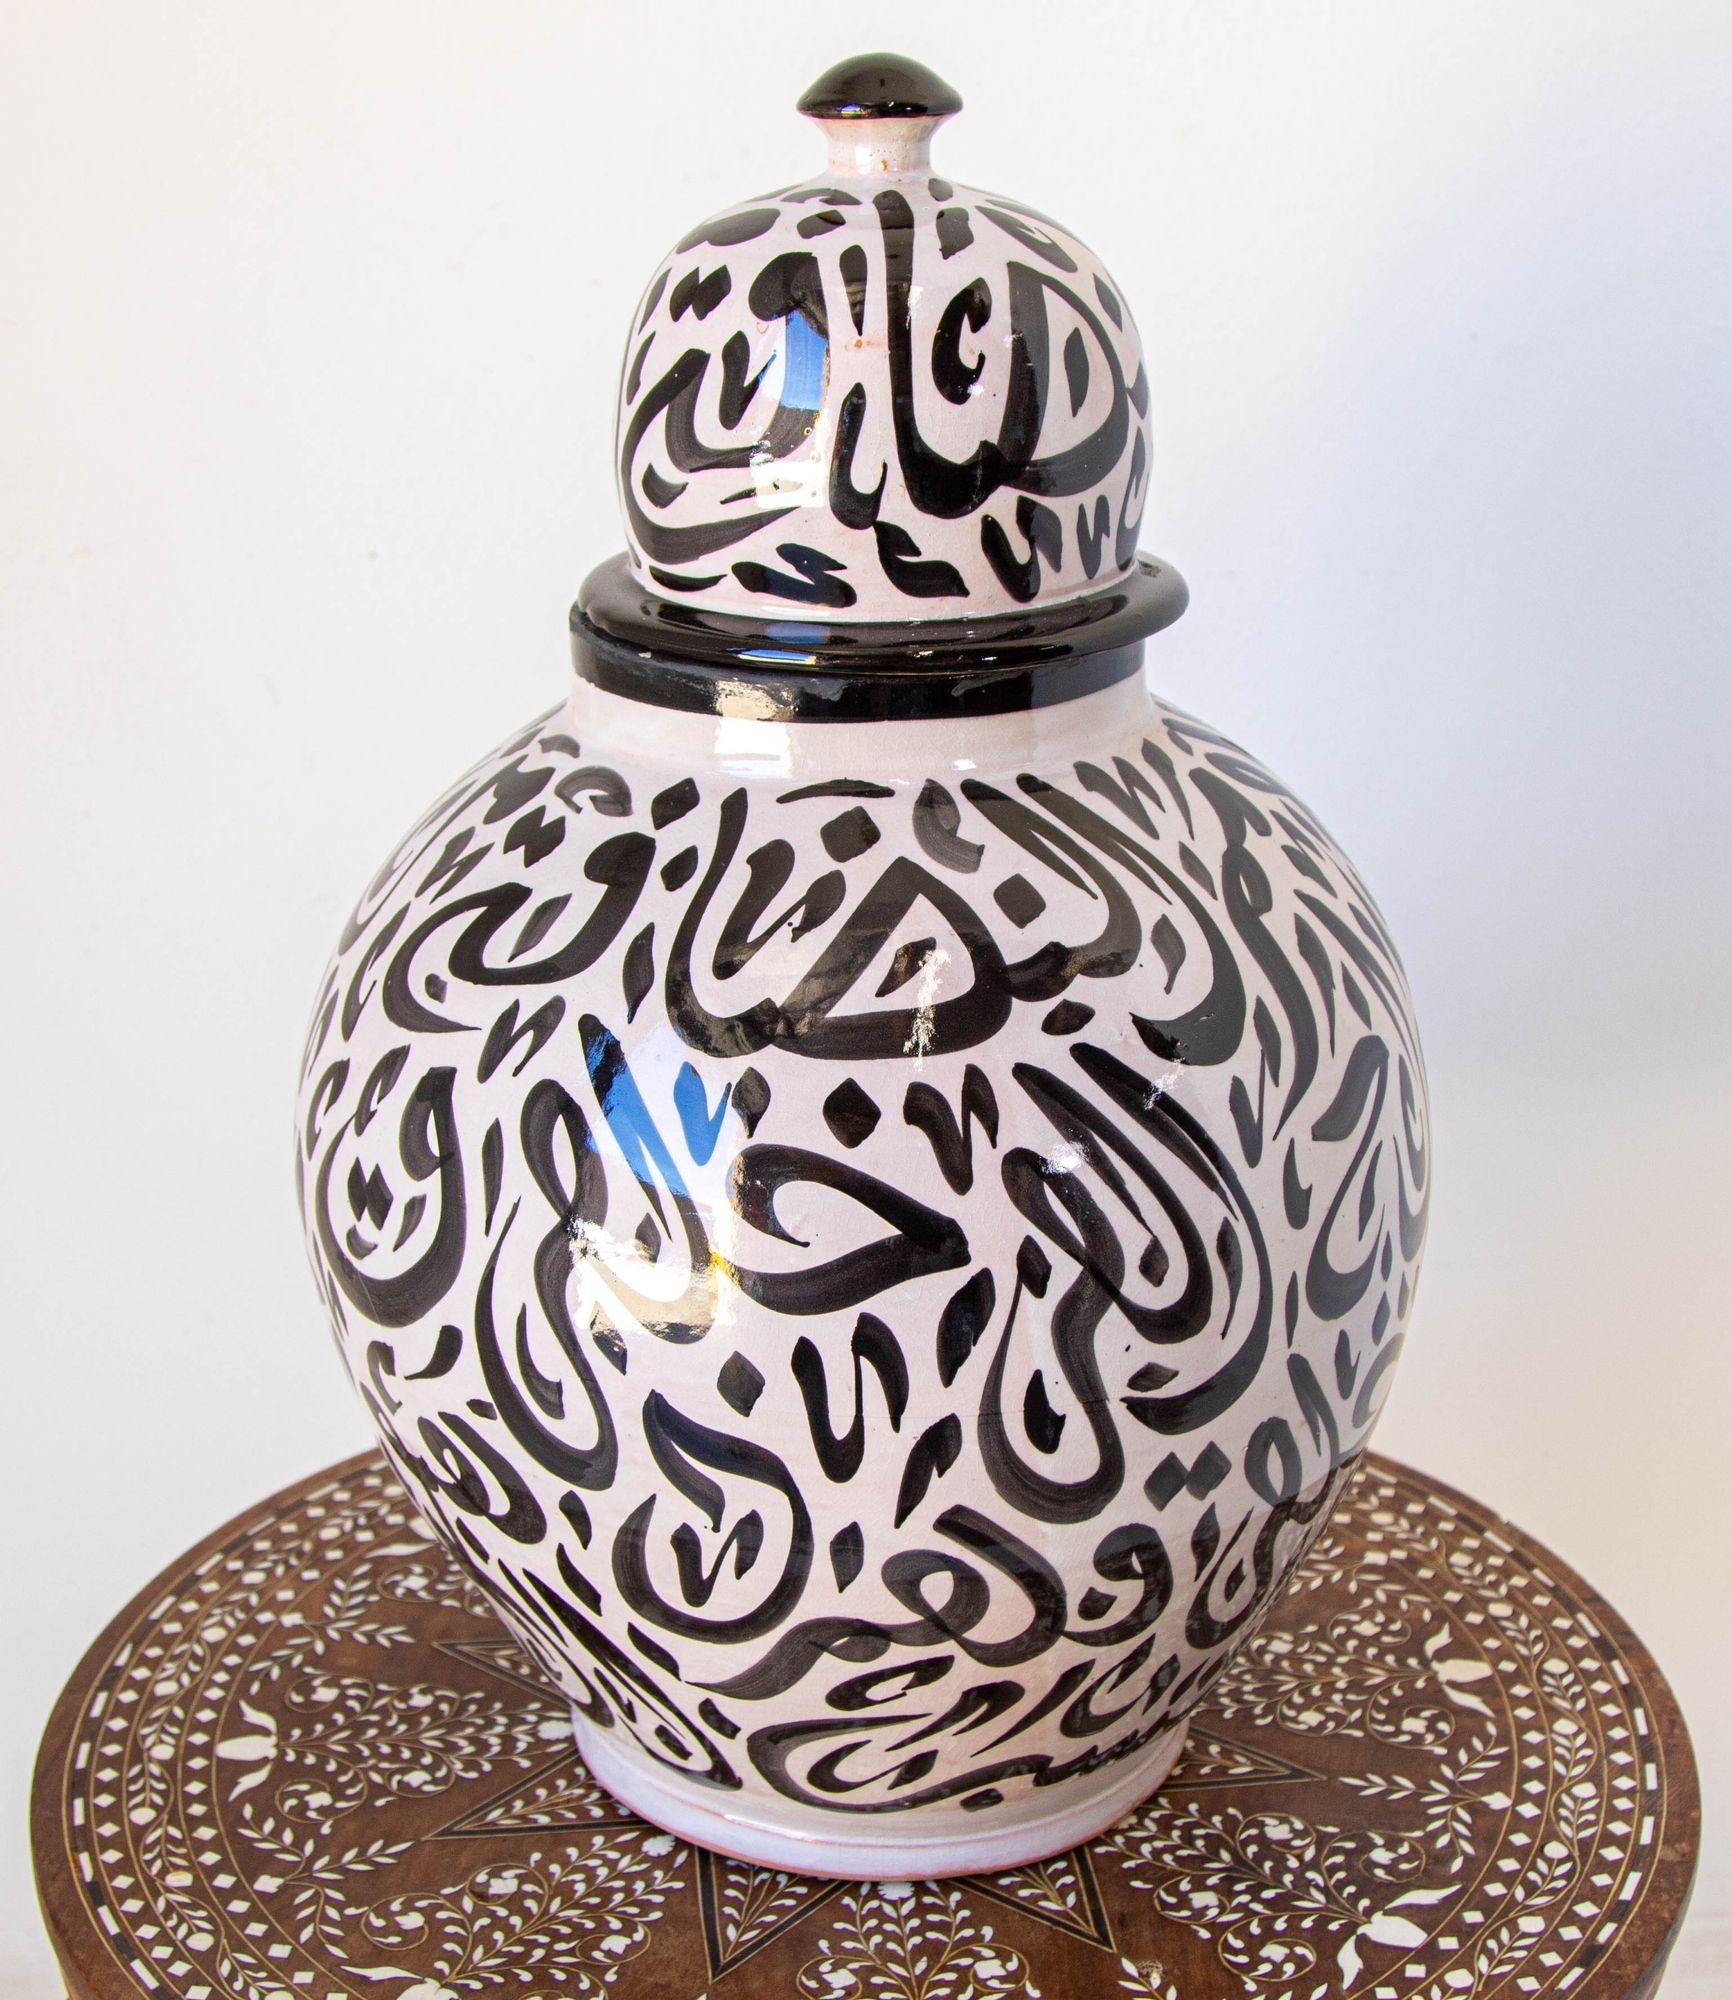 Moroccan Ceramic Lidded Urn with Arabic Calligraphy Black Writing, Fez For Sale 5